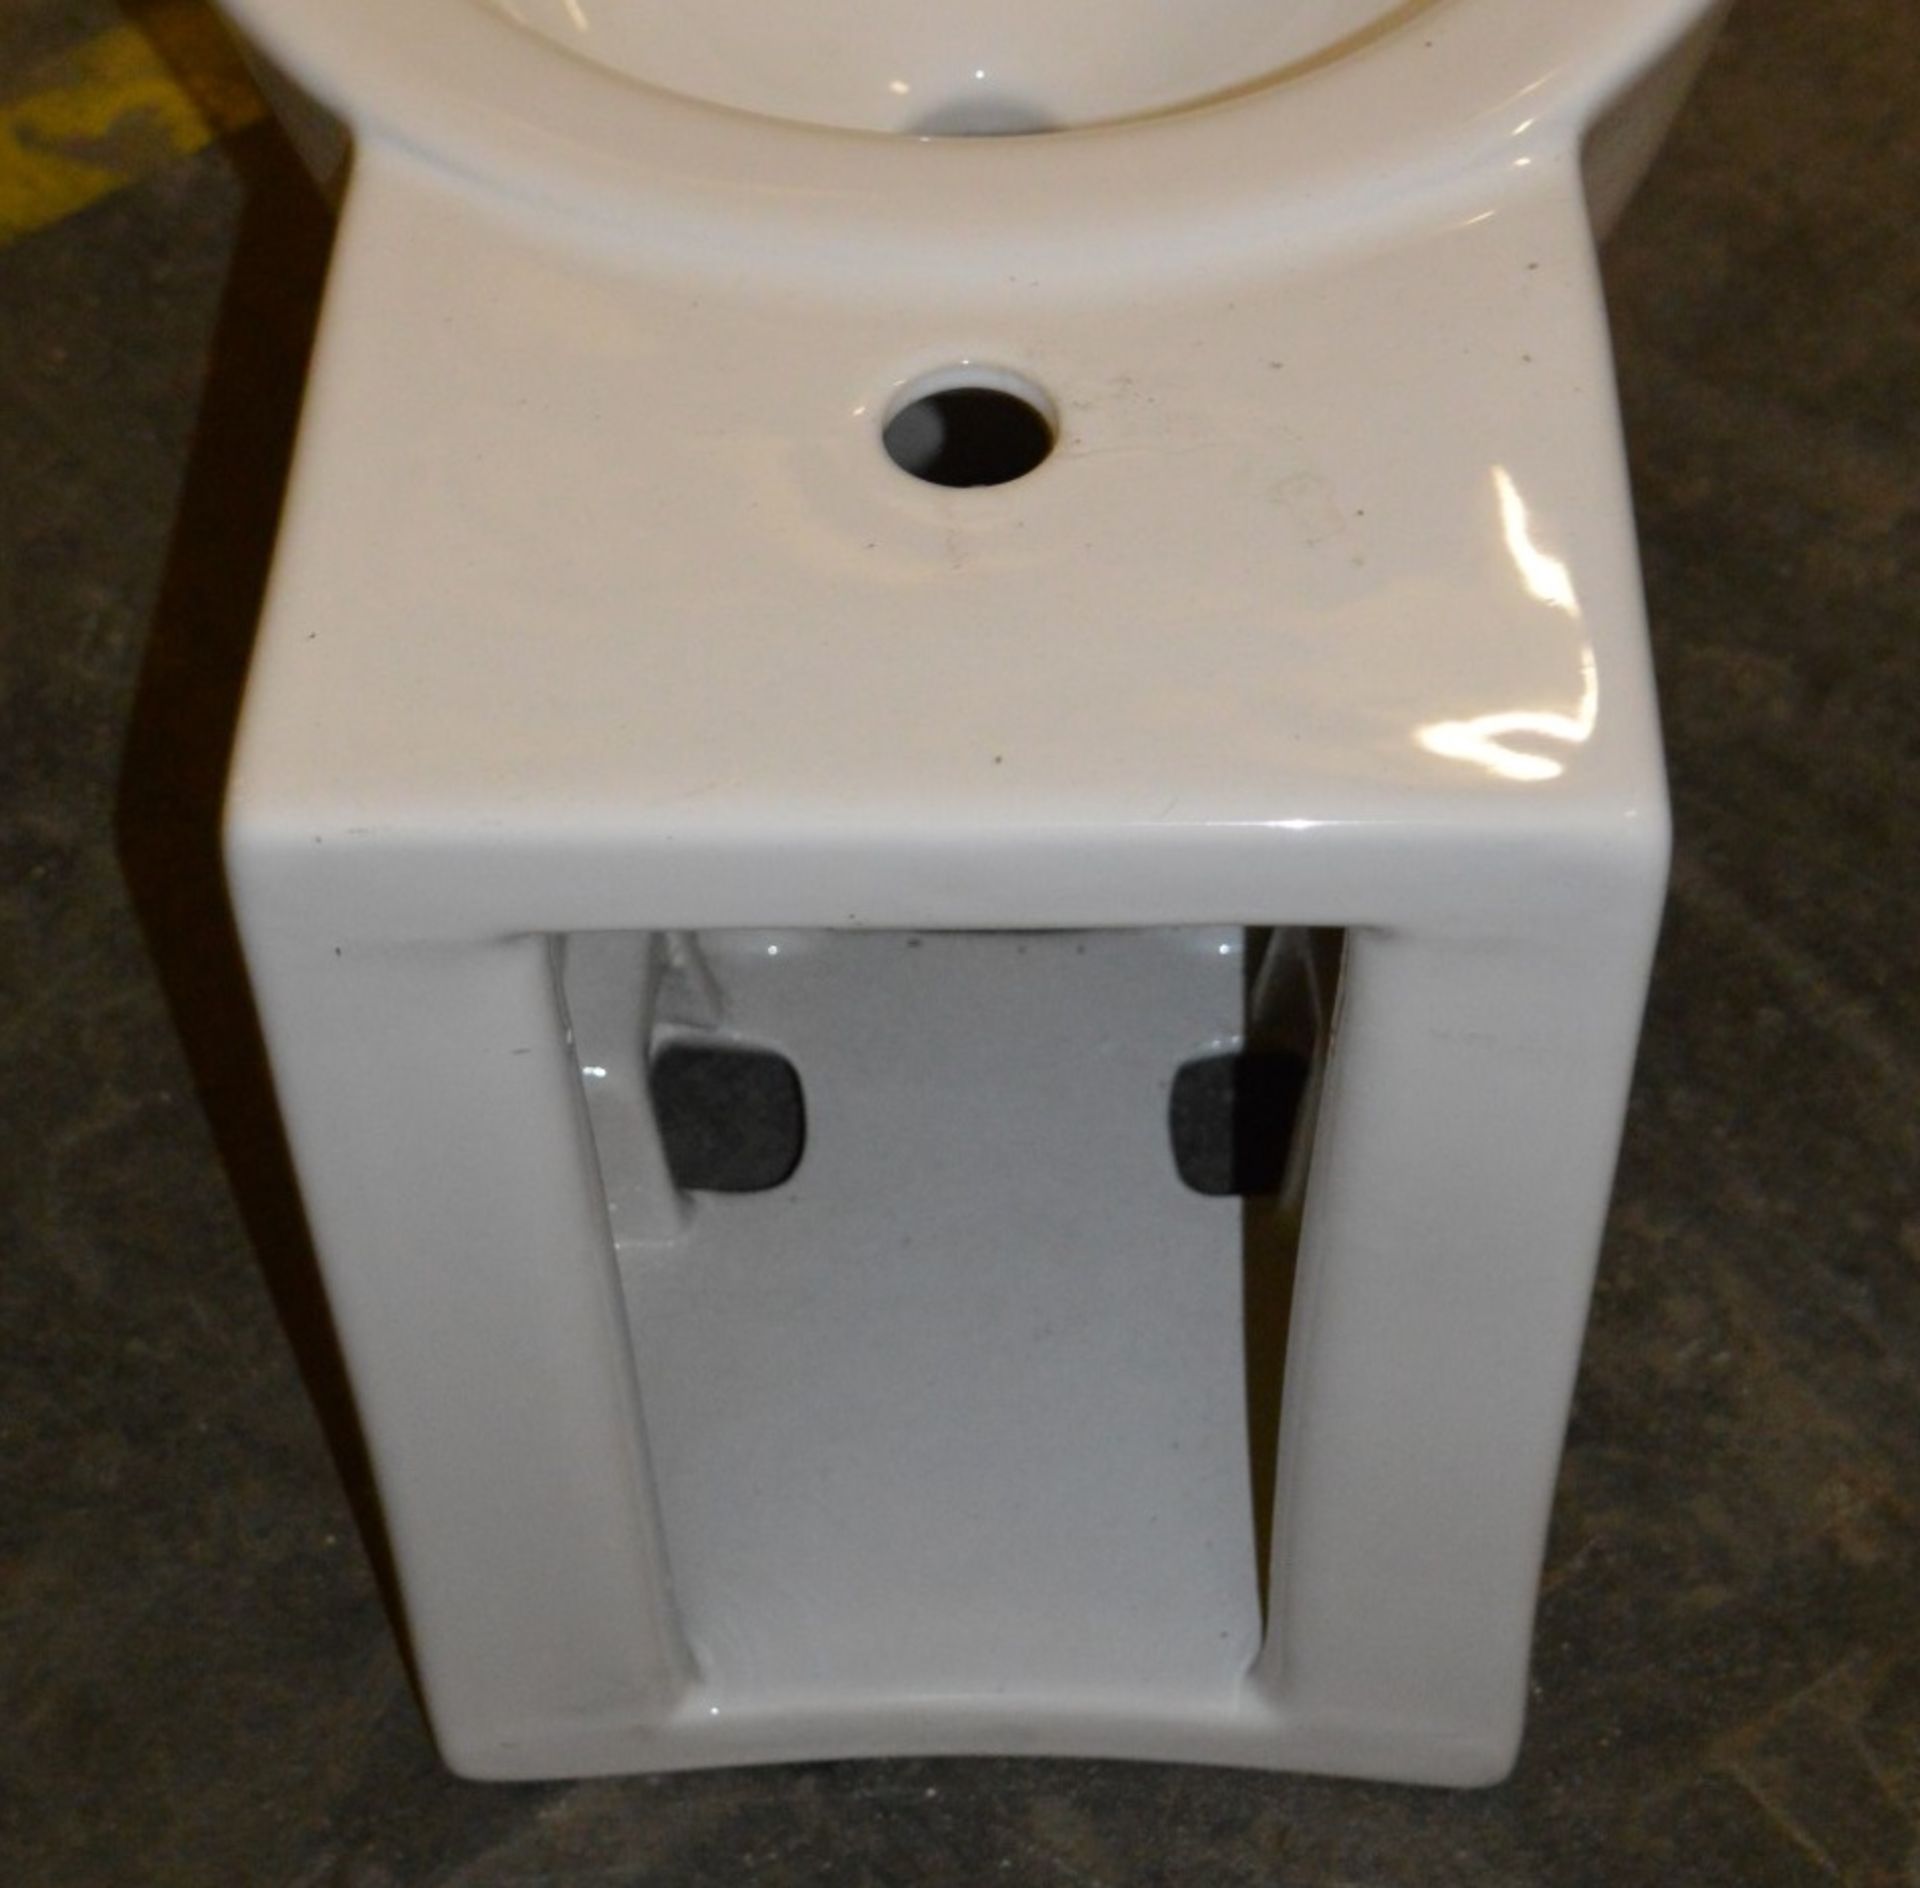 1 x Vogue Bathrooms DECO / TEFELI Single Tap Hole BIDET - Brand New and Boxed - Seat Not - Image 2 of 3